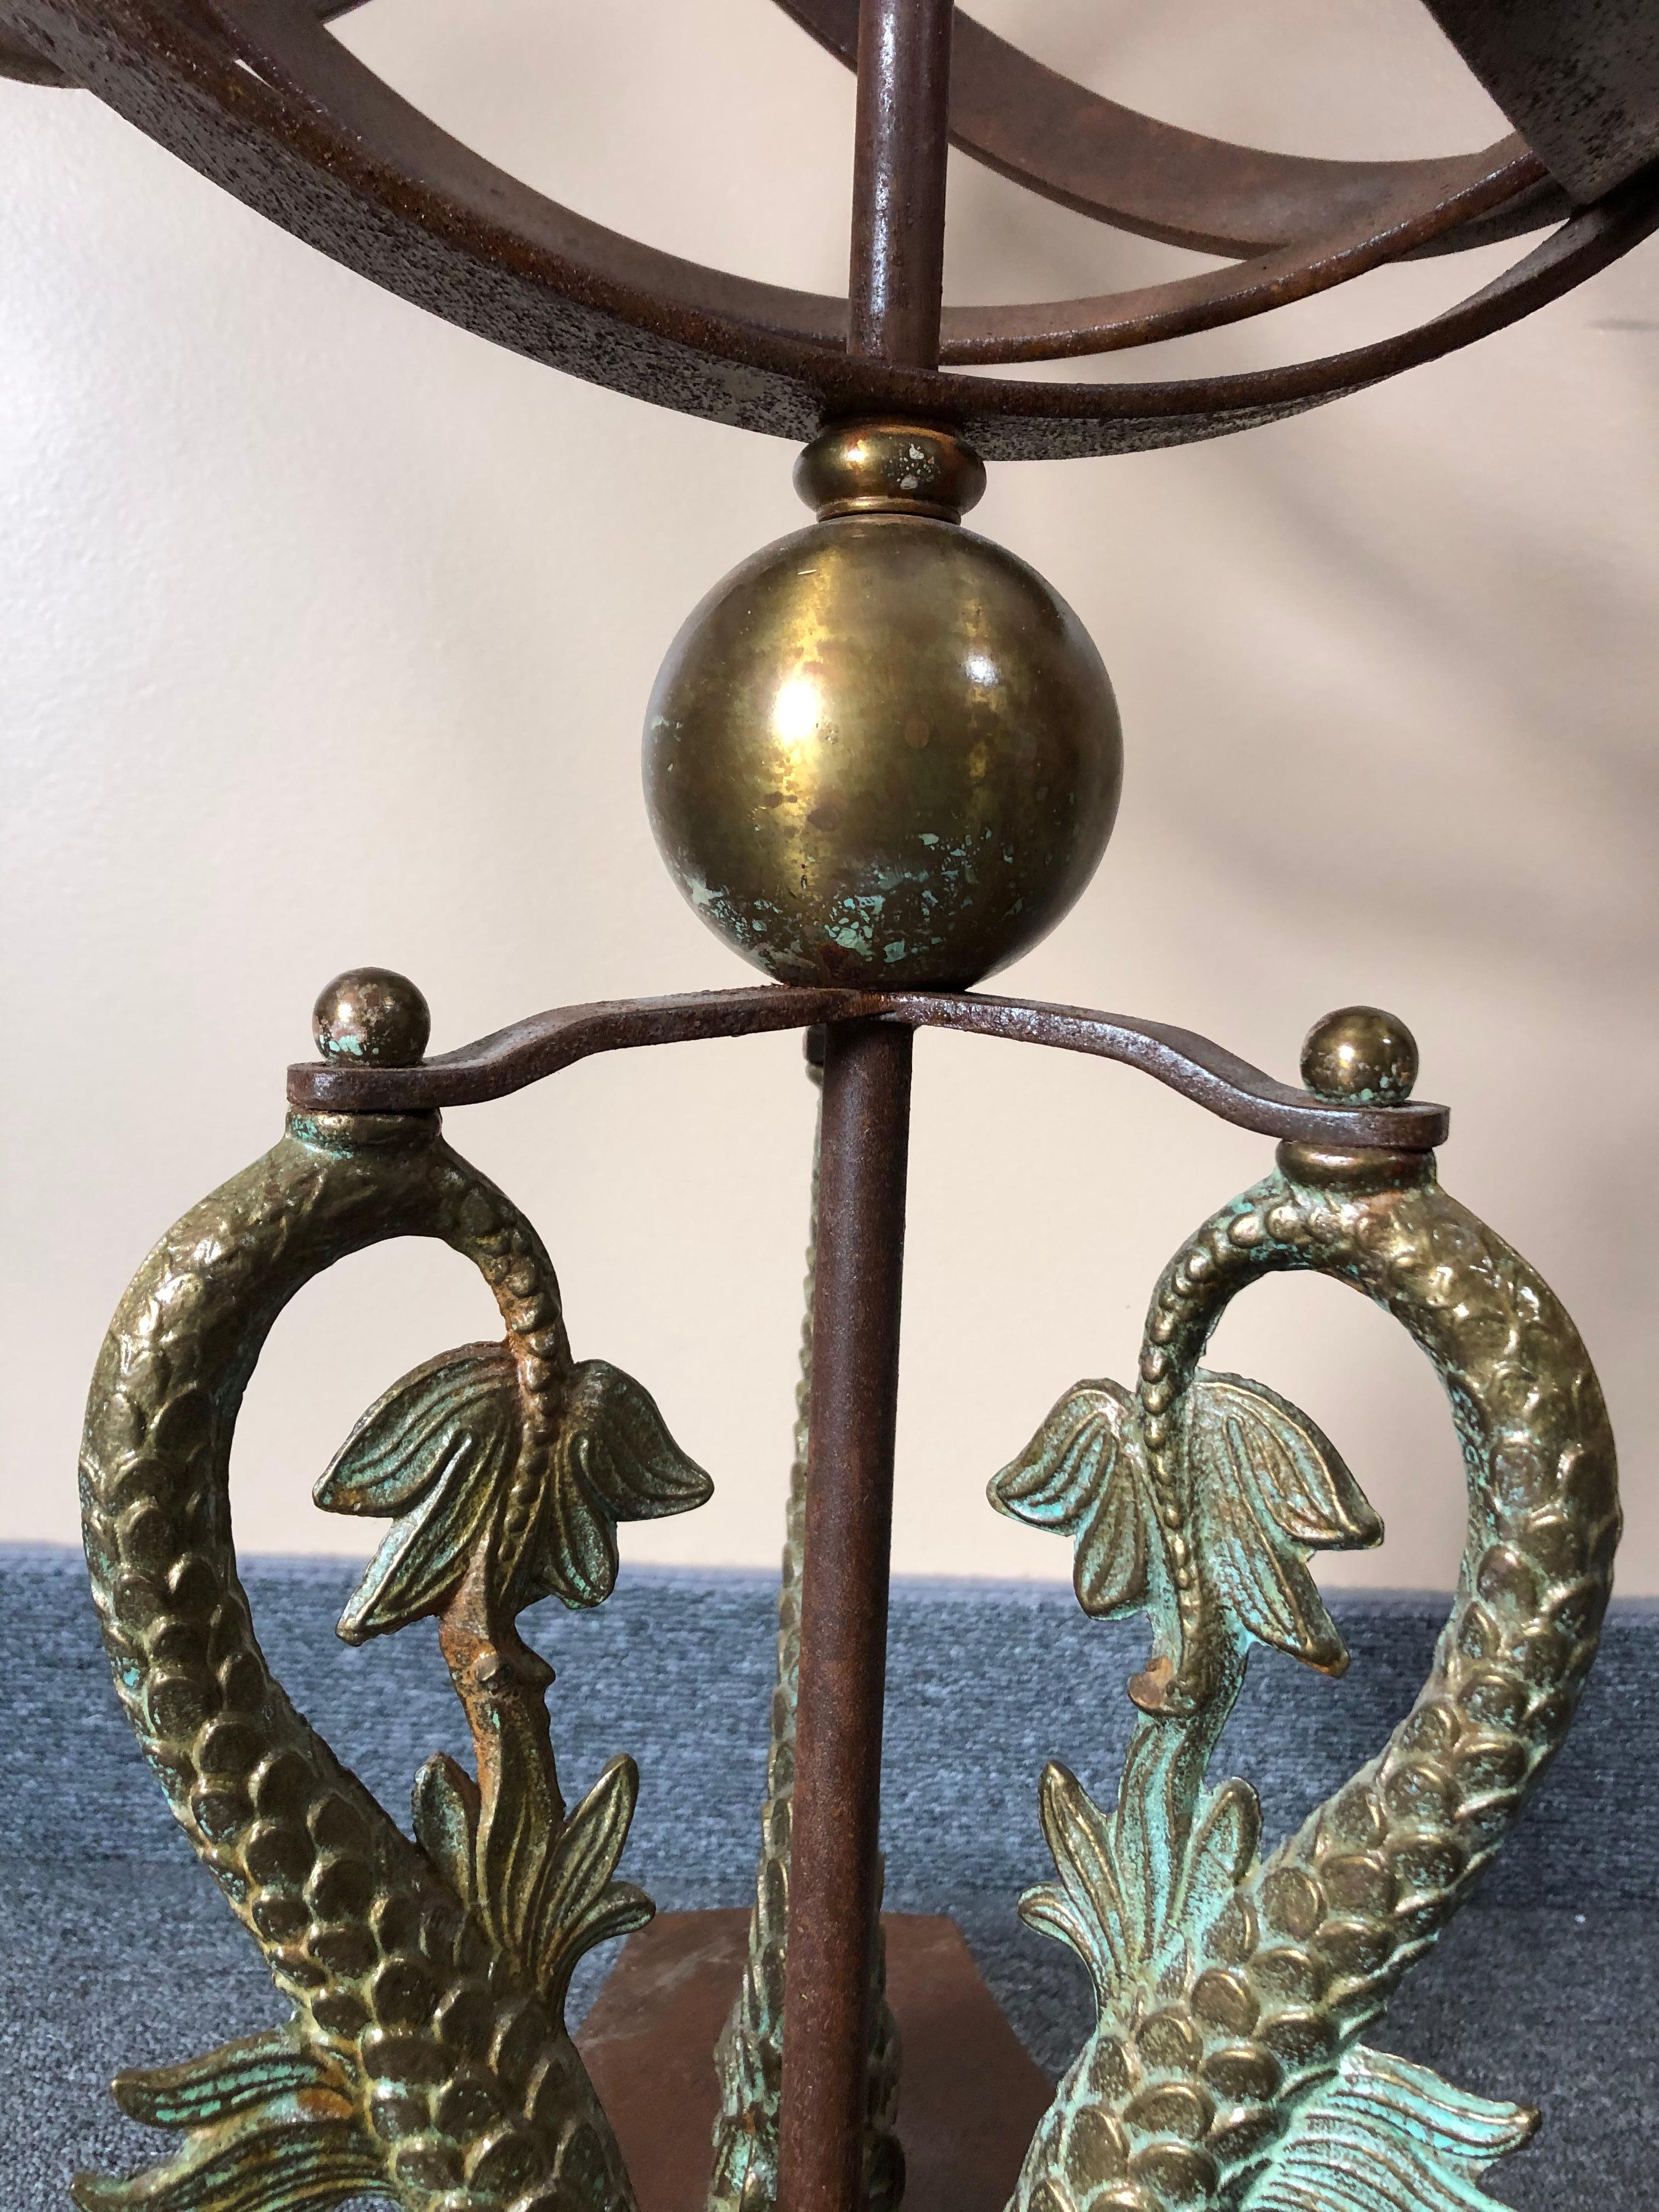 A big impressive iron armillary sculpture having a rust colored aged patina and verdigris dolphins adorning the base.
Diameter of sphere 17.5
Bases is 16.25 diameter.